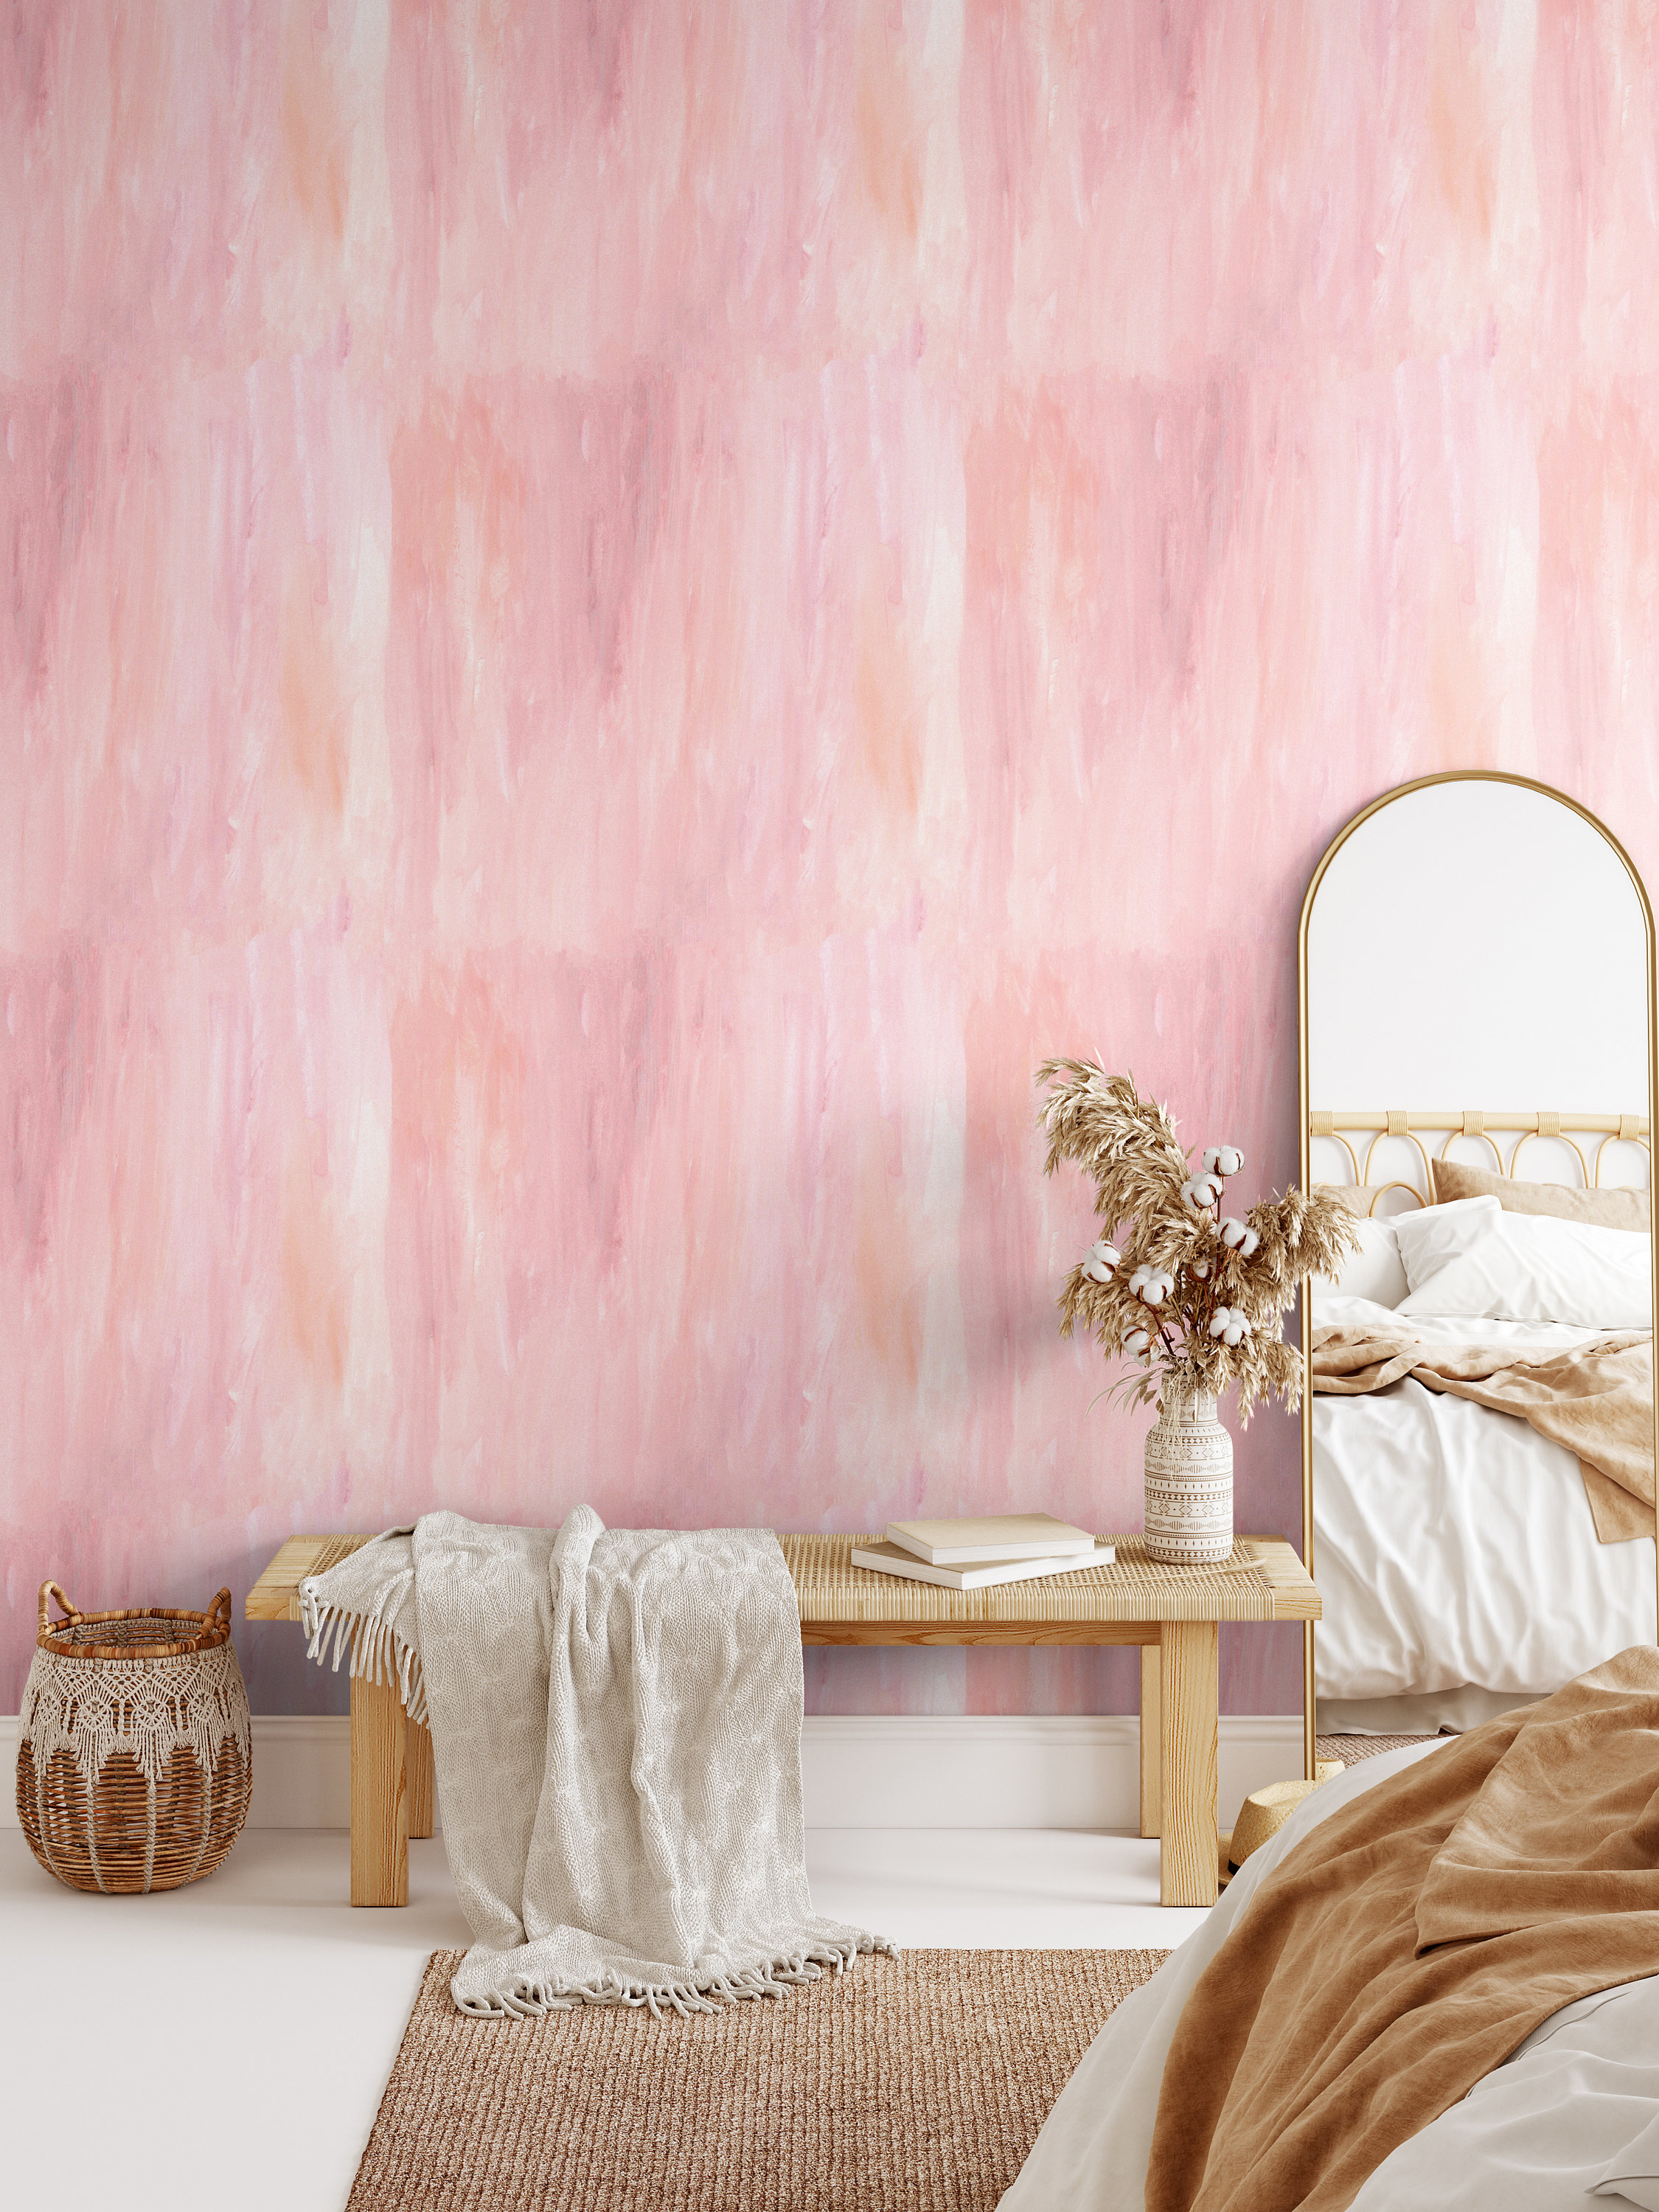 Everything You Need to Embrace the Limewash Wall Trend  Havenly Blog   Havenly Interior Design Blog